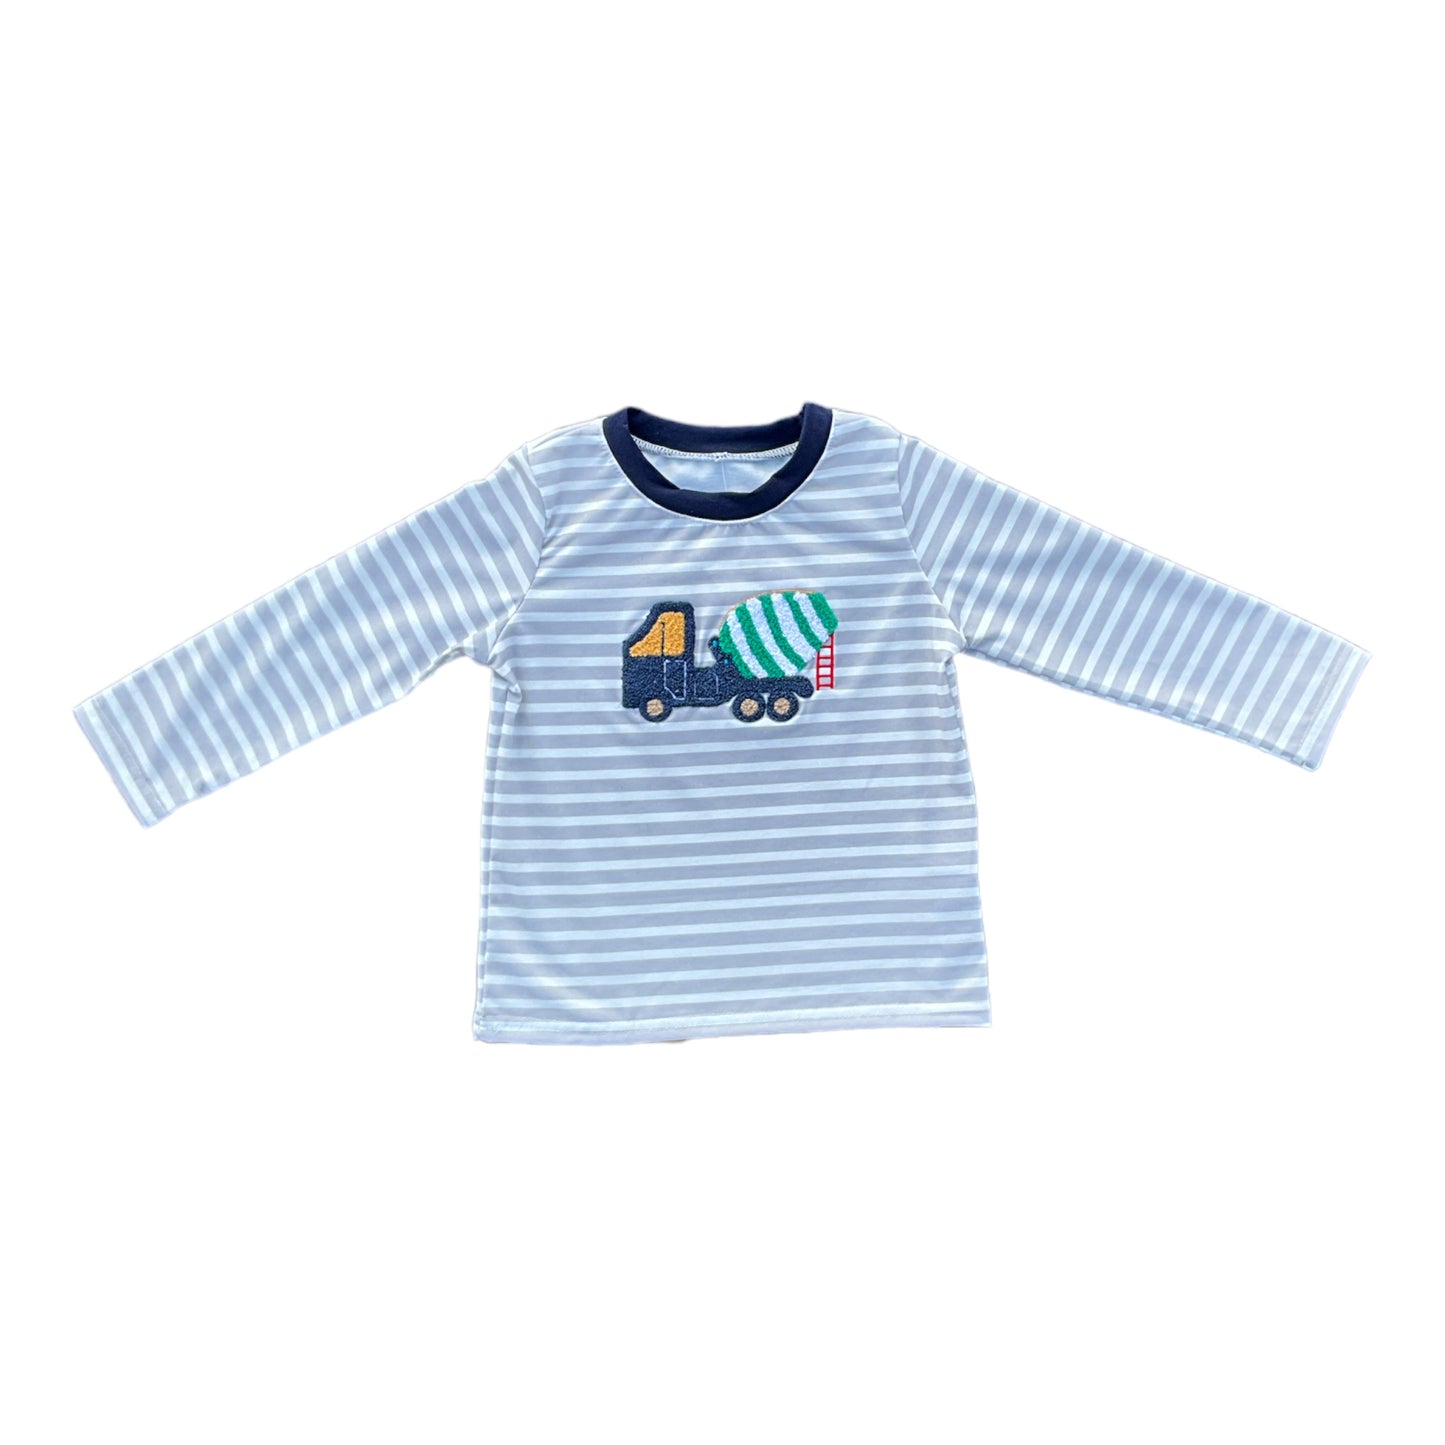 Grey Stripe French Knot Truck Top